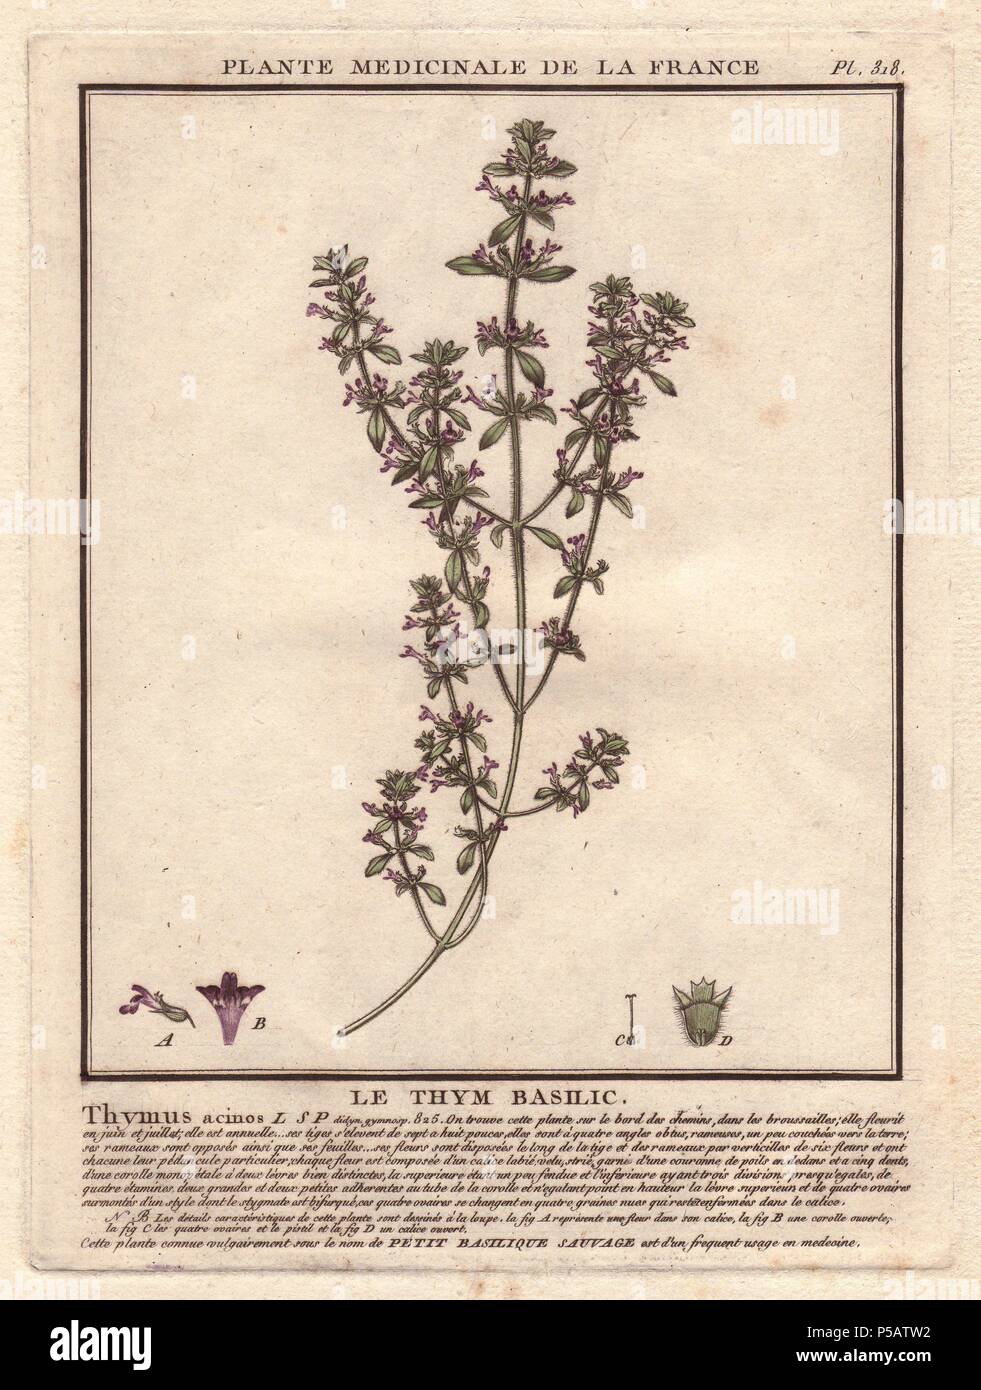 Basil thyme or wild basil (Acinos arvensis). . Thymus acinos. . French botanist Jean Baptiste François Pierre Bulliard was born around 1742 at Aubepierre-en-Barrois (Haute Marne) and died on 26 September 1793 in Paris. He studied at Angers, and later illustrated and published a number of botanical and mycological works on French flora. He studied art and engraving under Francois Martinet, the celebrated artist of many of Buffon's natural history books. Stock Photo